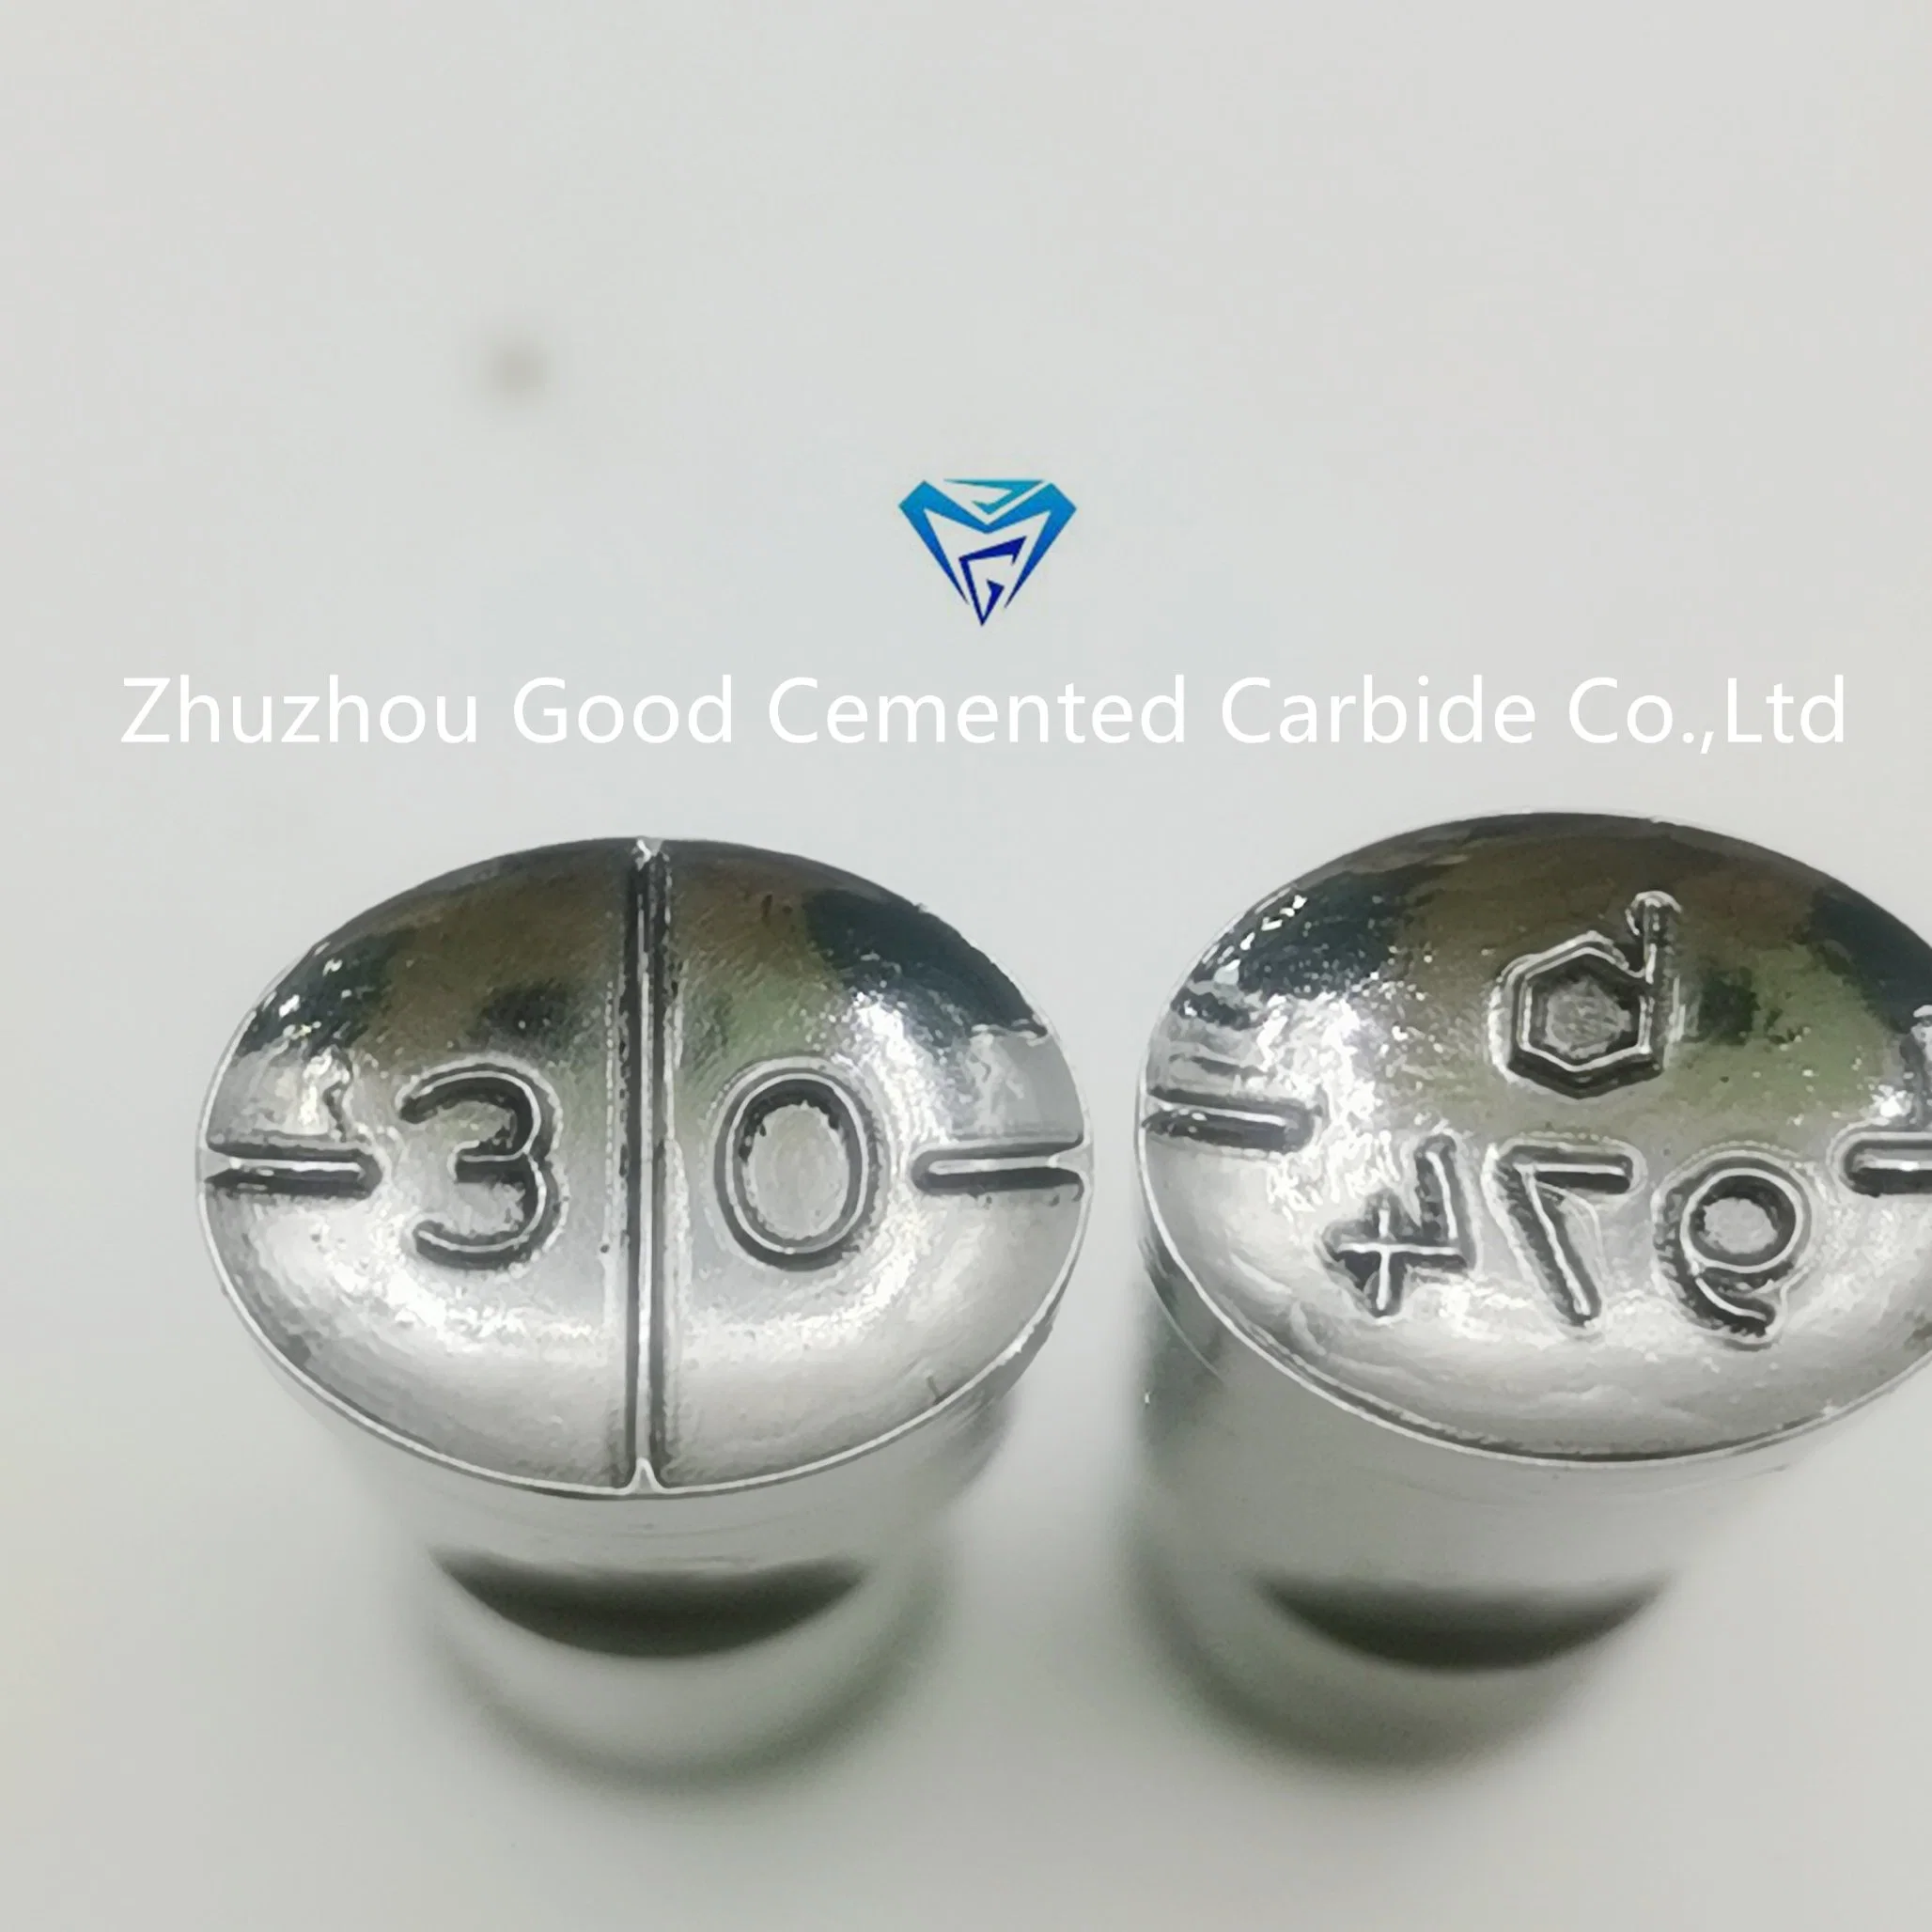 3D Round Pill Sugar Stamp Candy Press Punch Die Set for Tdp0/ Tdp 1.5 or Tdp5 Tdp6 Molds Machine Moulds Stamp Dies 6mm 6.5mm 8mm 10mm